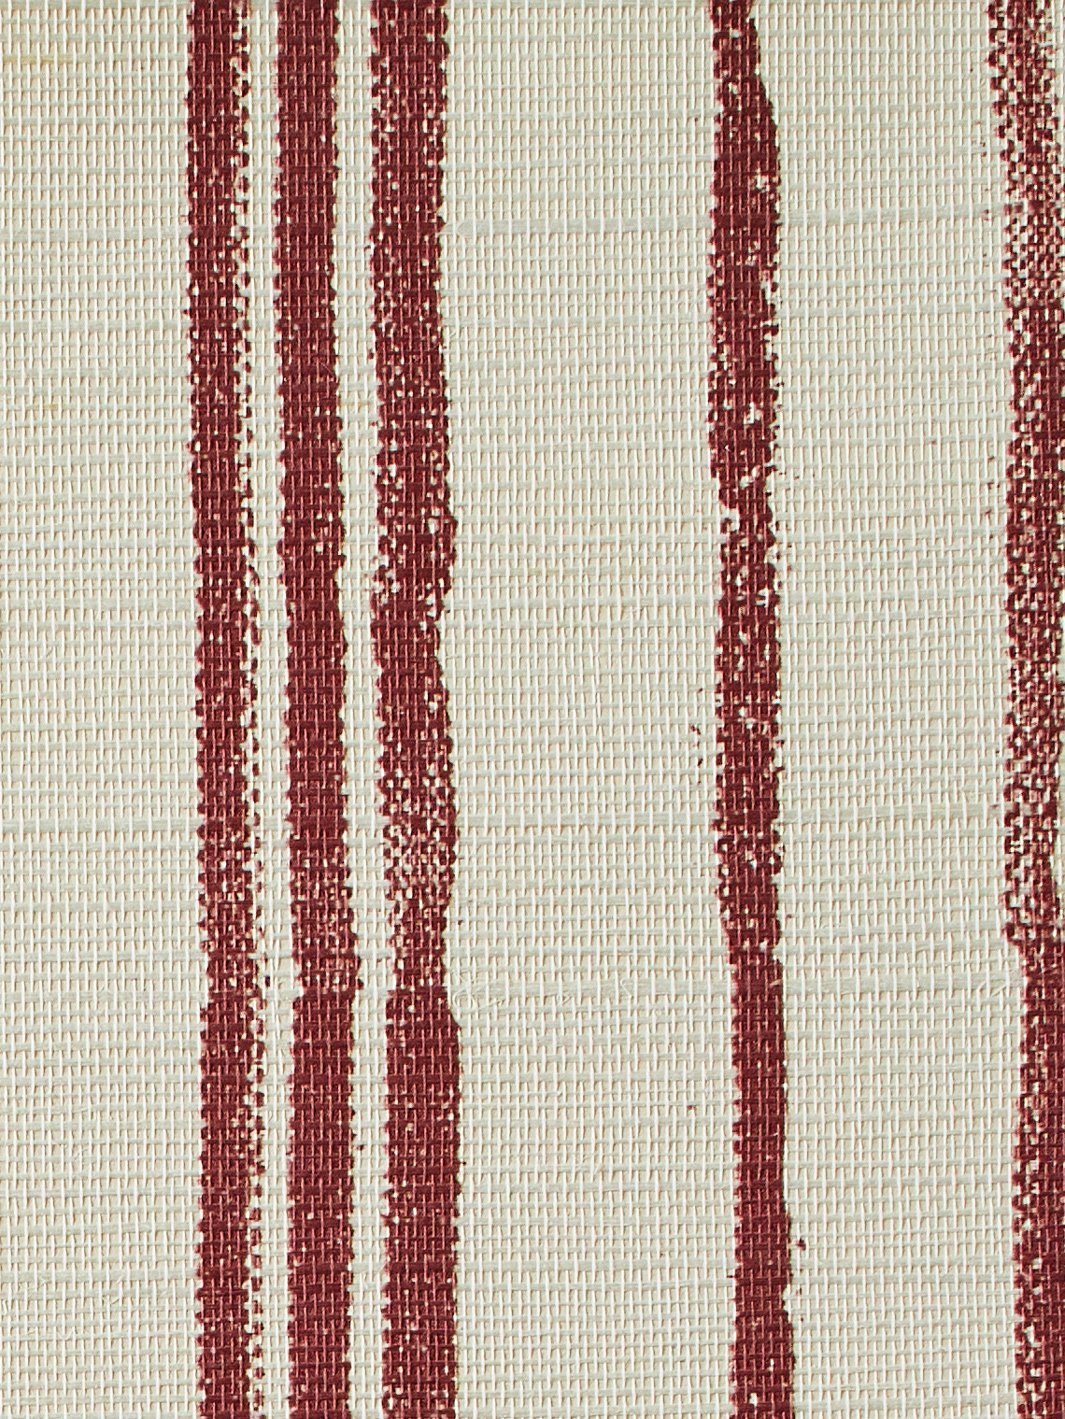 'Painted Stripes' Grasscloth' Wallpaper by Nathan Turner - Rust